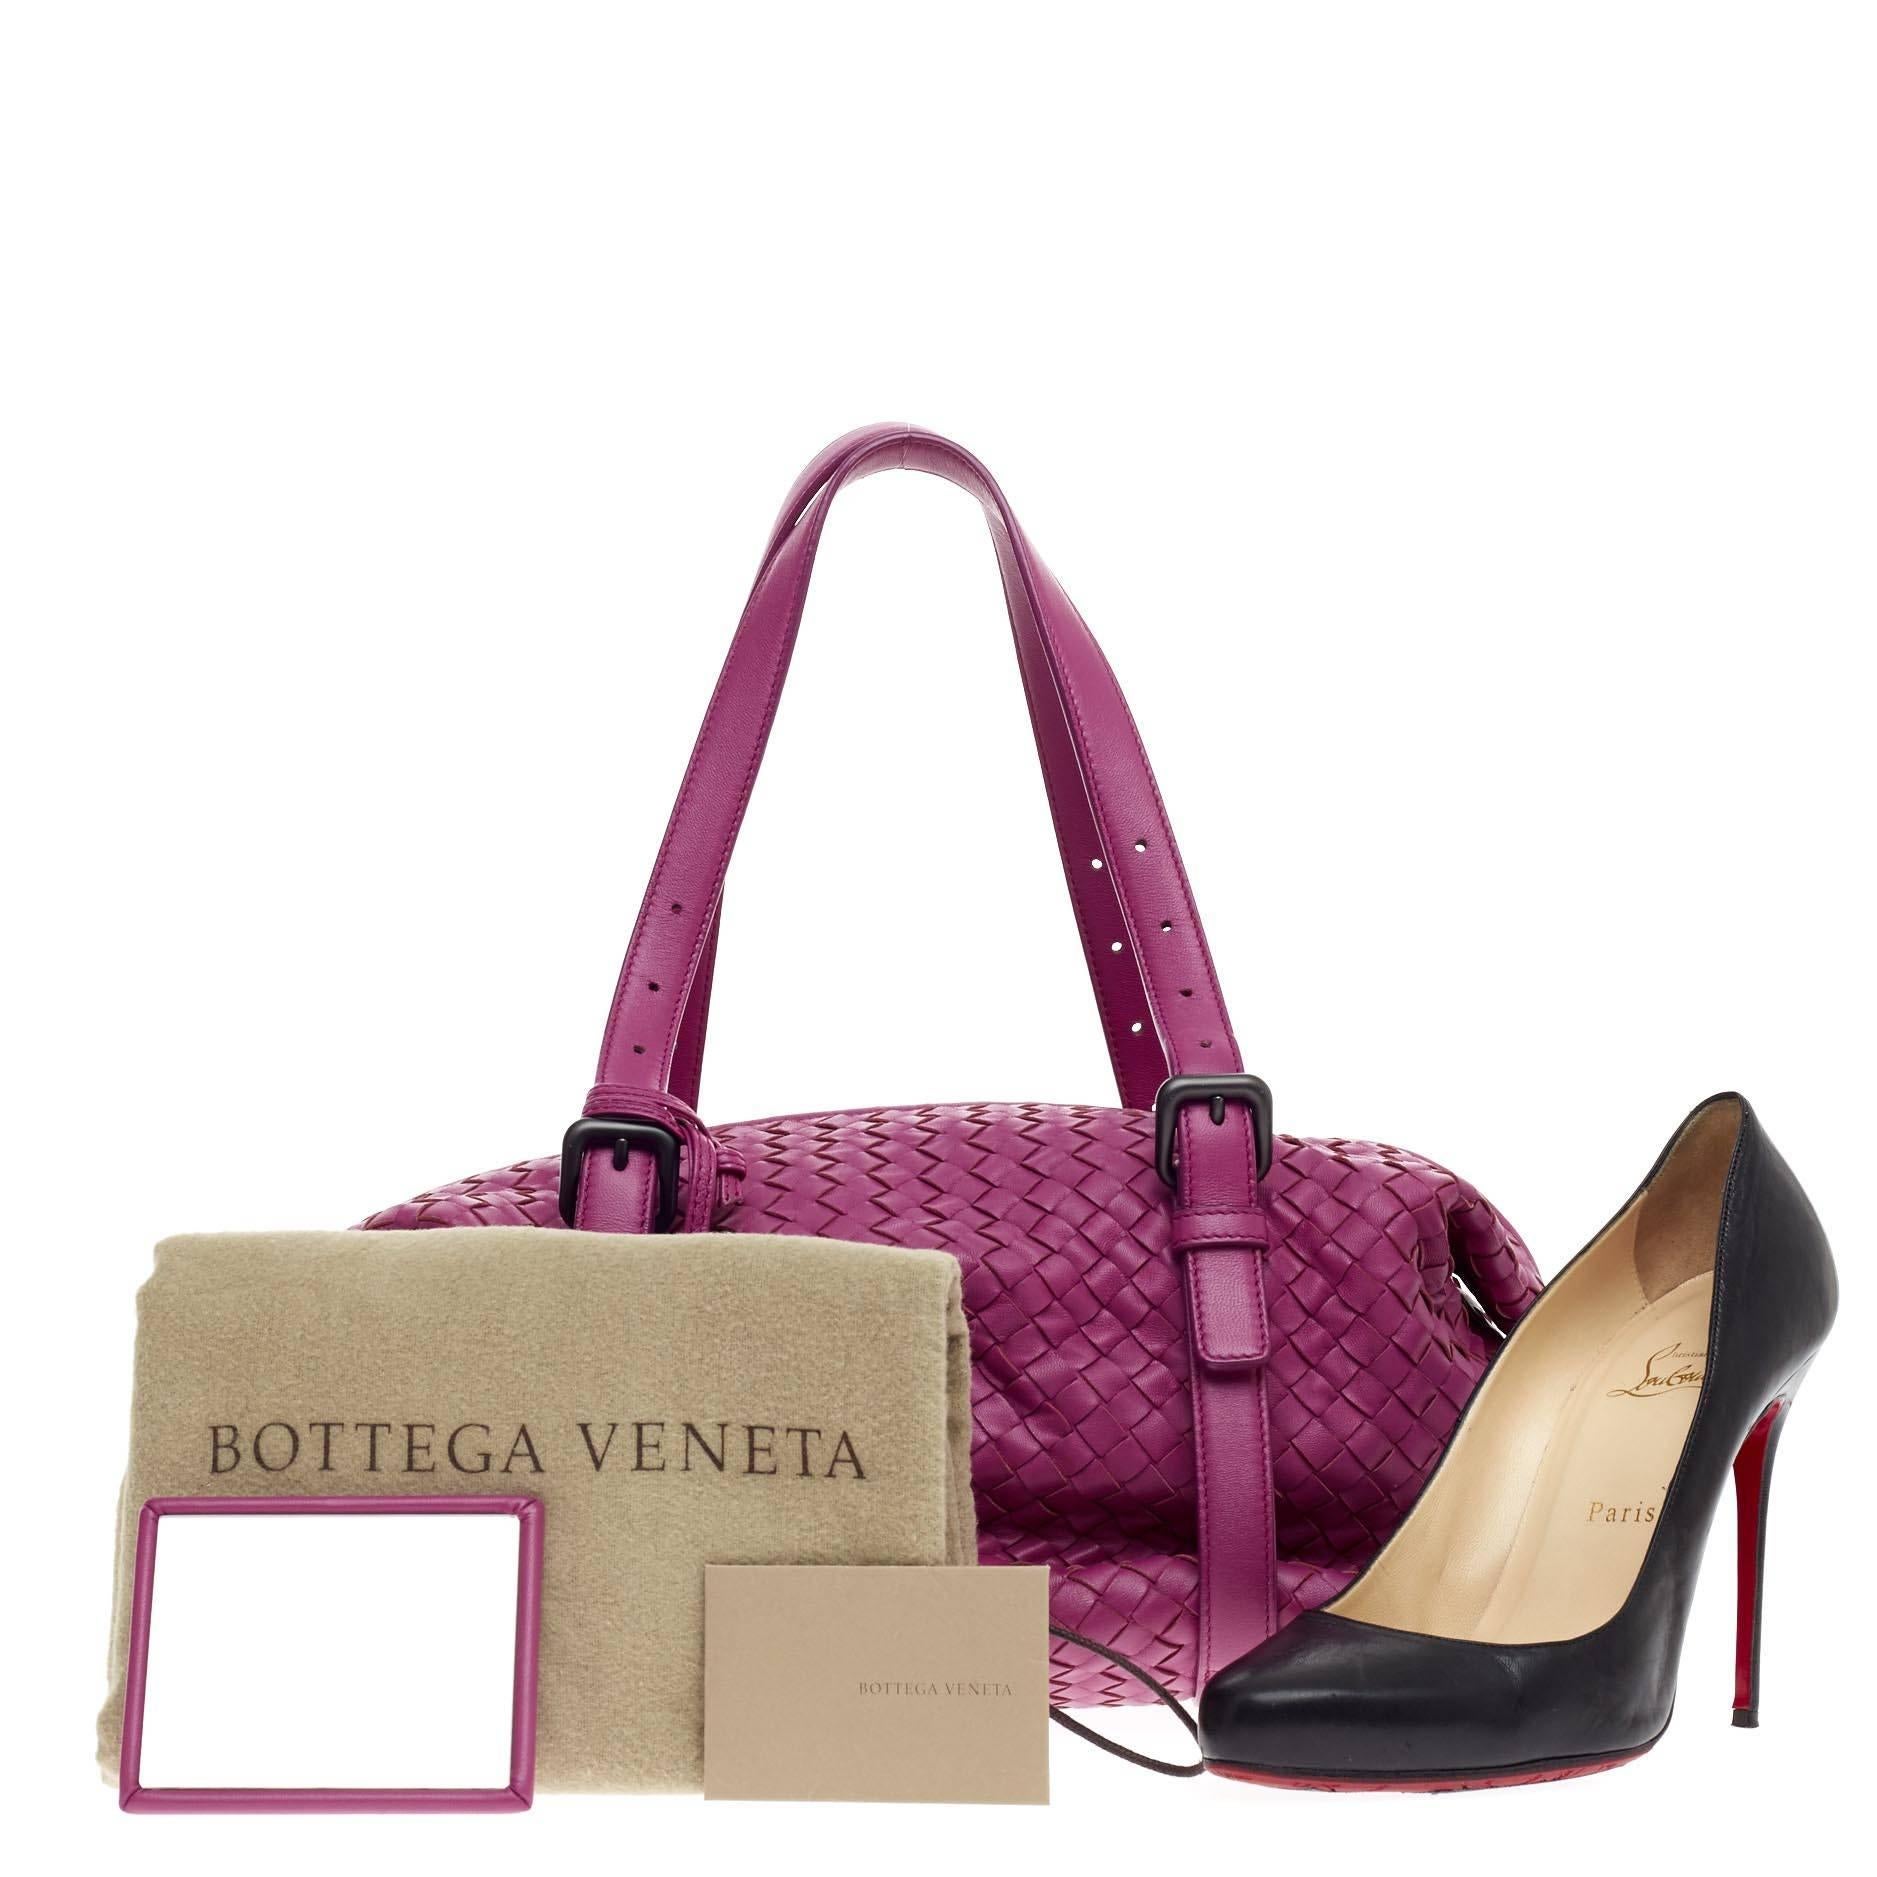 This authentic Bottega Veneta Montaigne Shoulder Bag Intrecciato Nappa Medium presented in the brand's 2011 Collection is a timelessly elegant bag with a casual silhouette made for everyday excursions. Crafted from vibrant orchid purple nappa